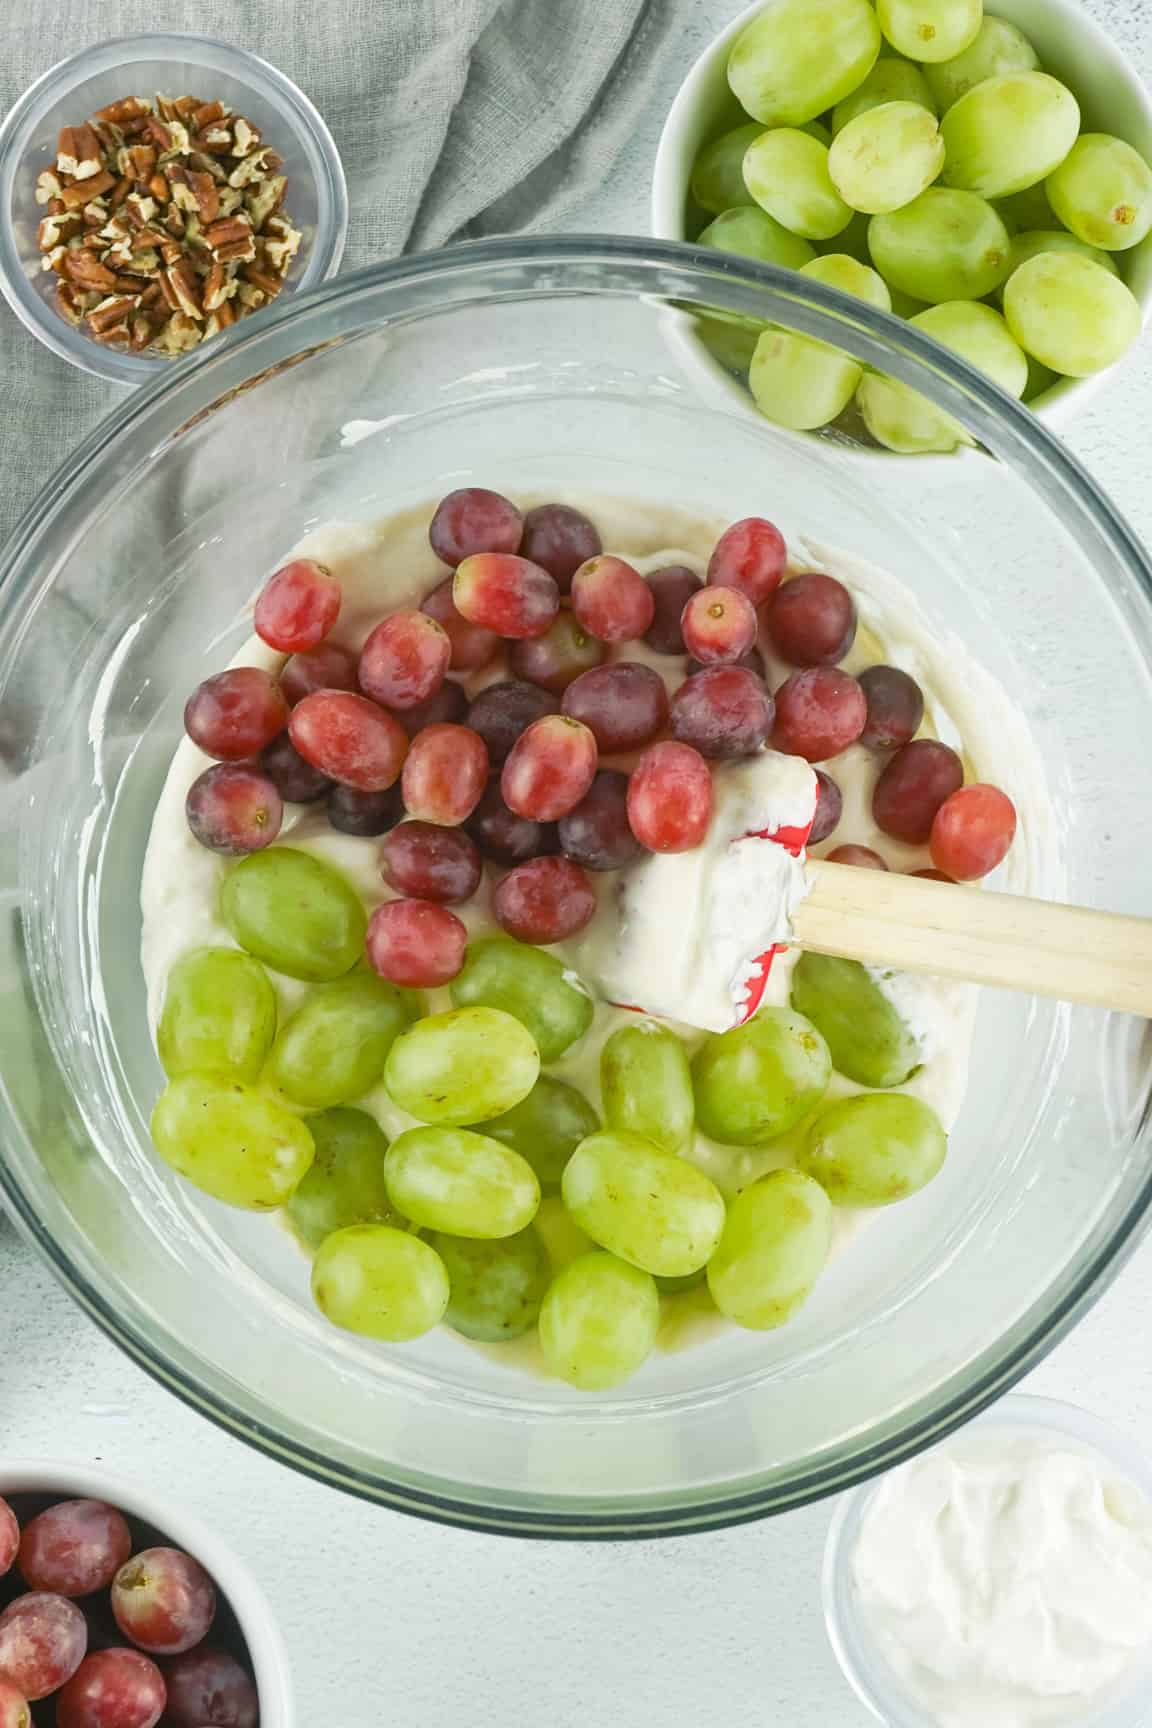 Grapes added to cream cheese mixture.